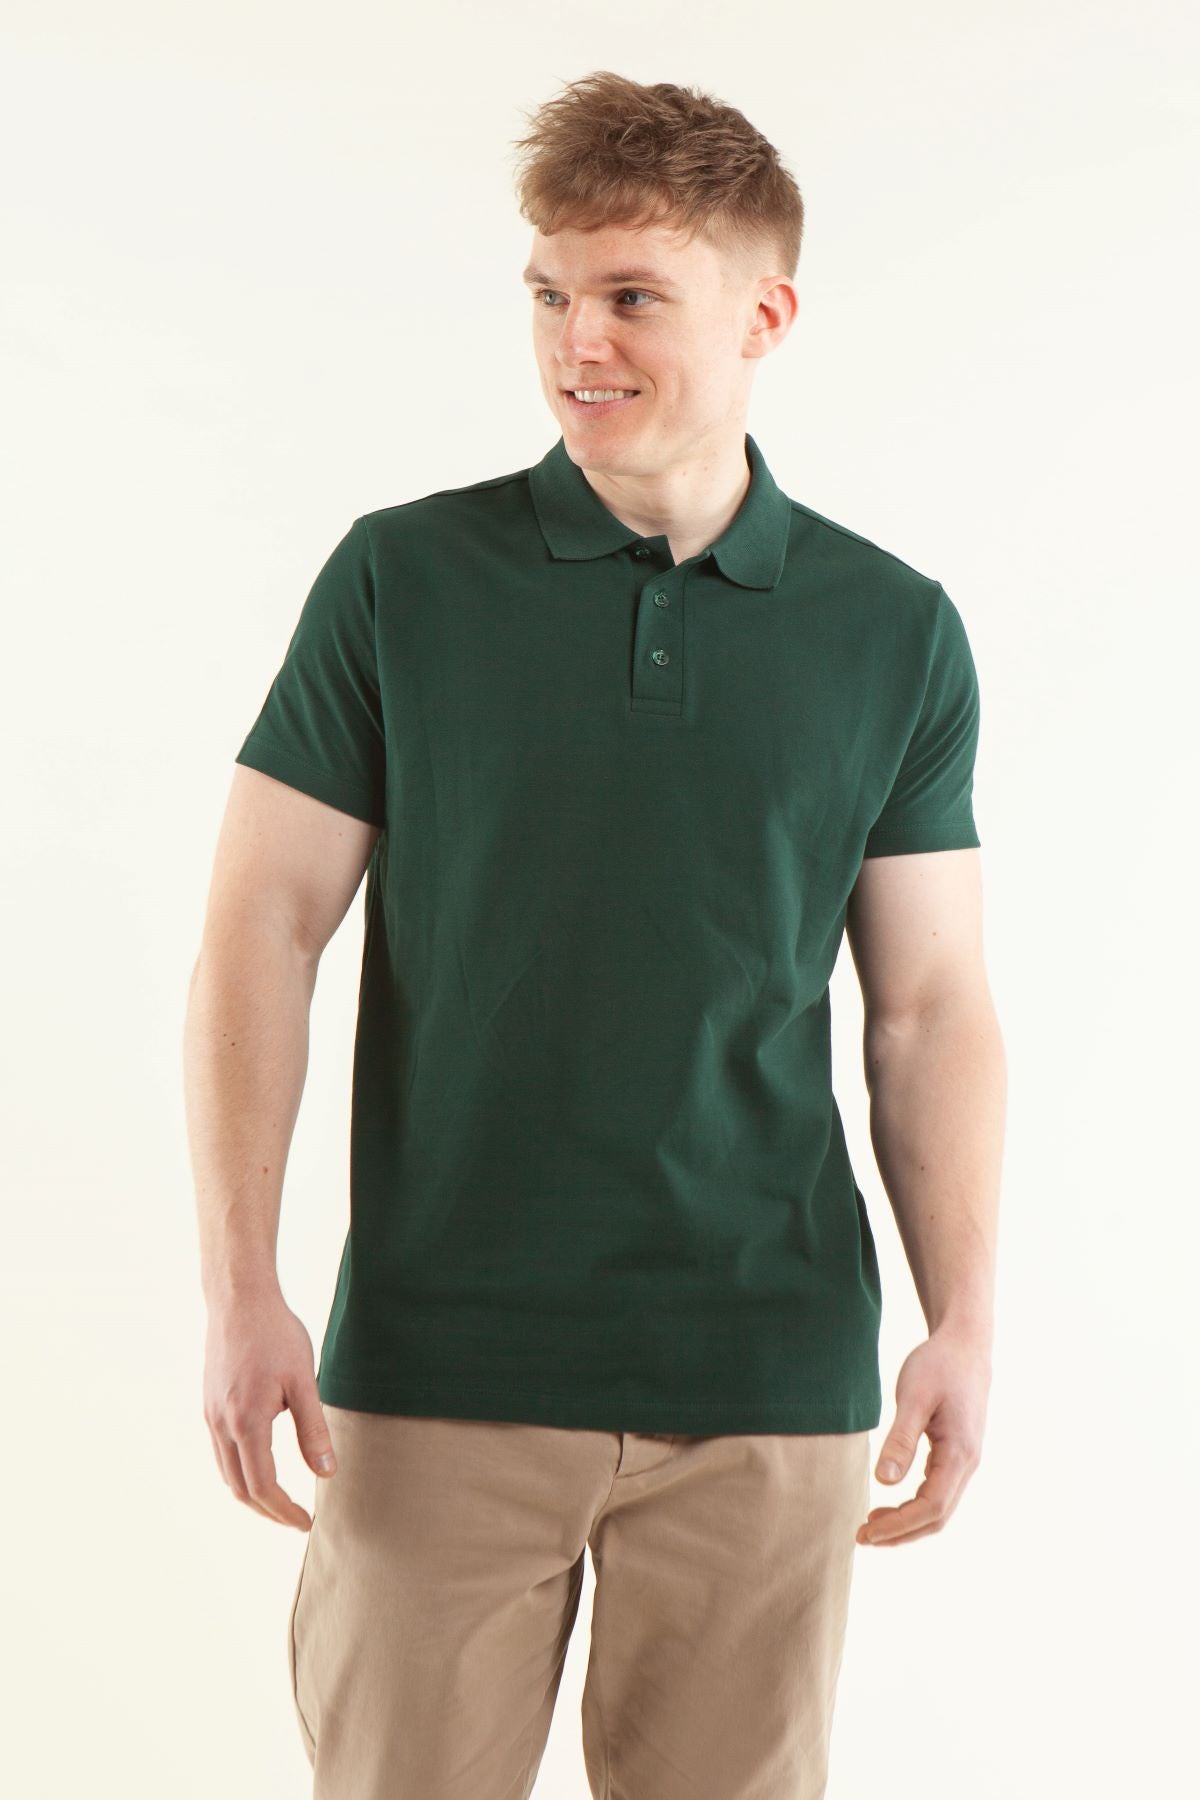 The Lightweight Polo - Multipack of 2